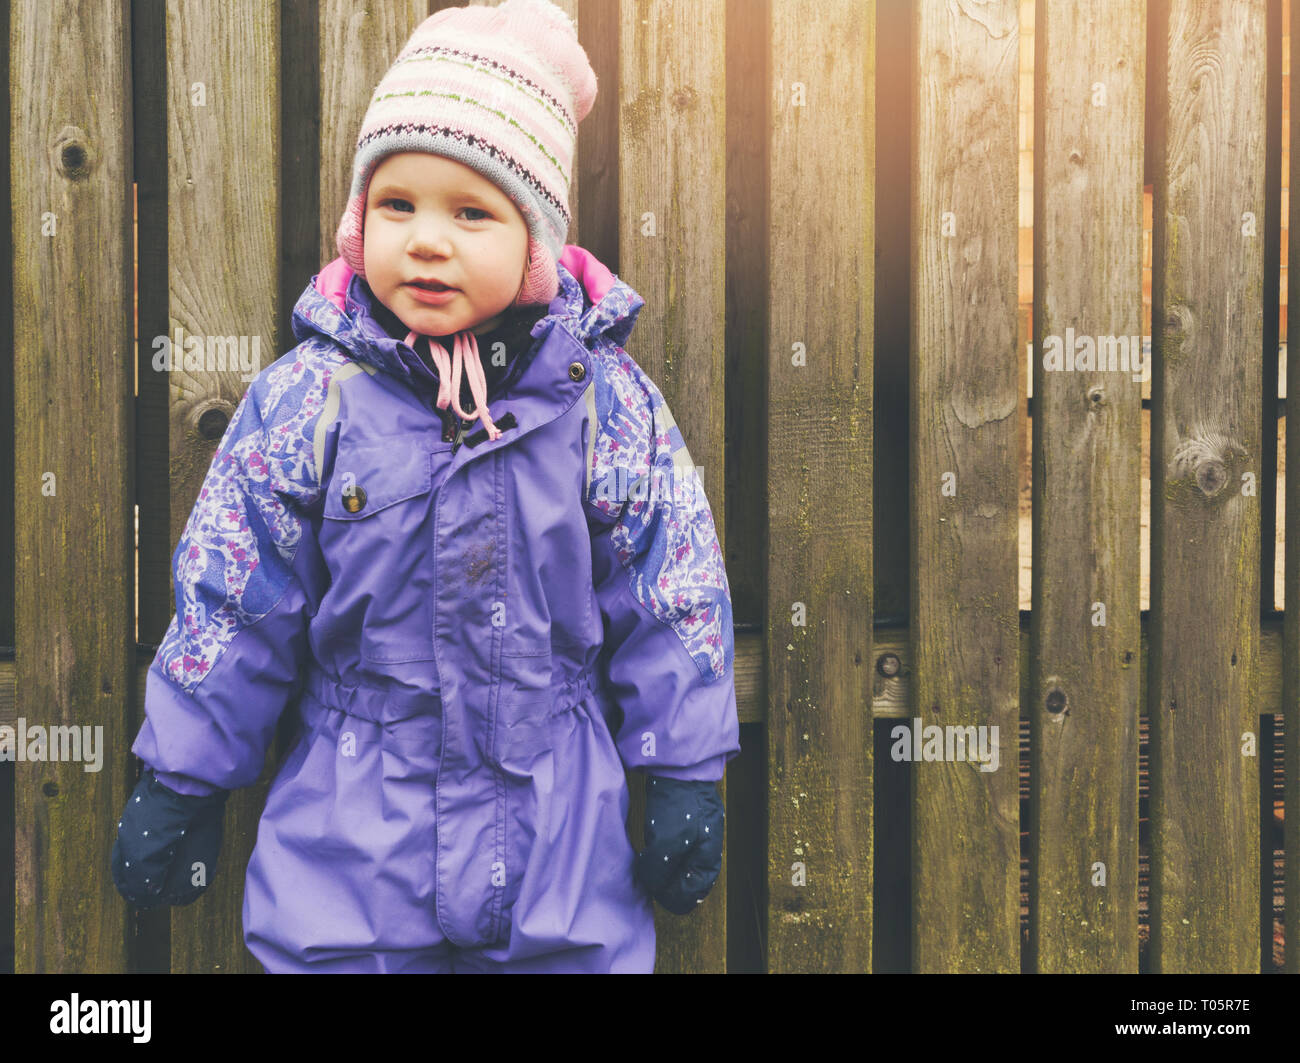 little girl wearing purple coverall standing by the wooden fence Stock Photo